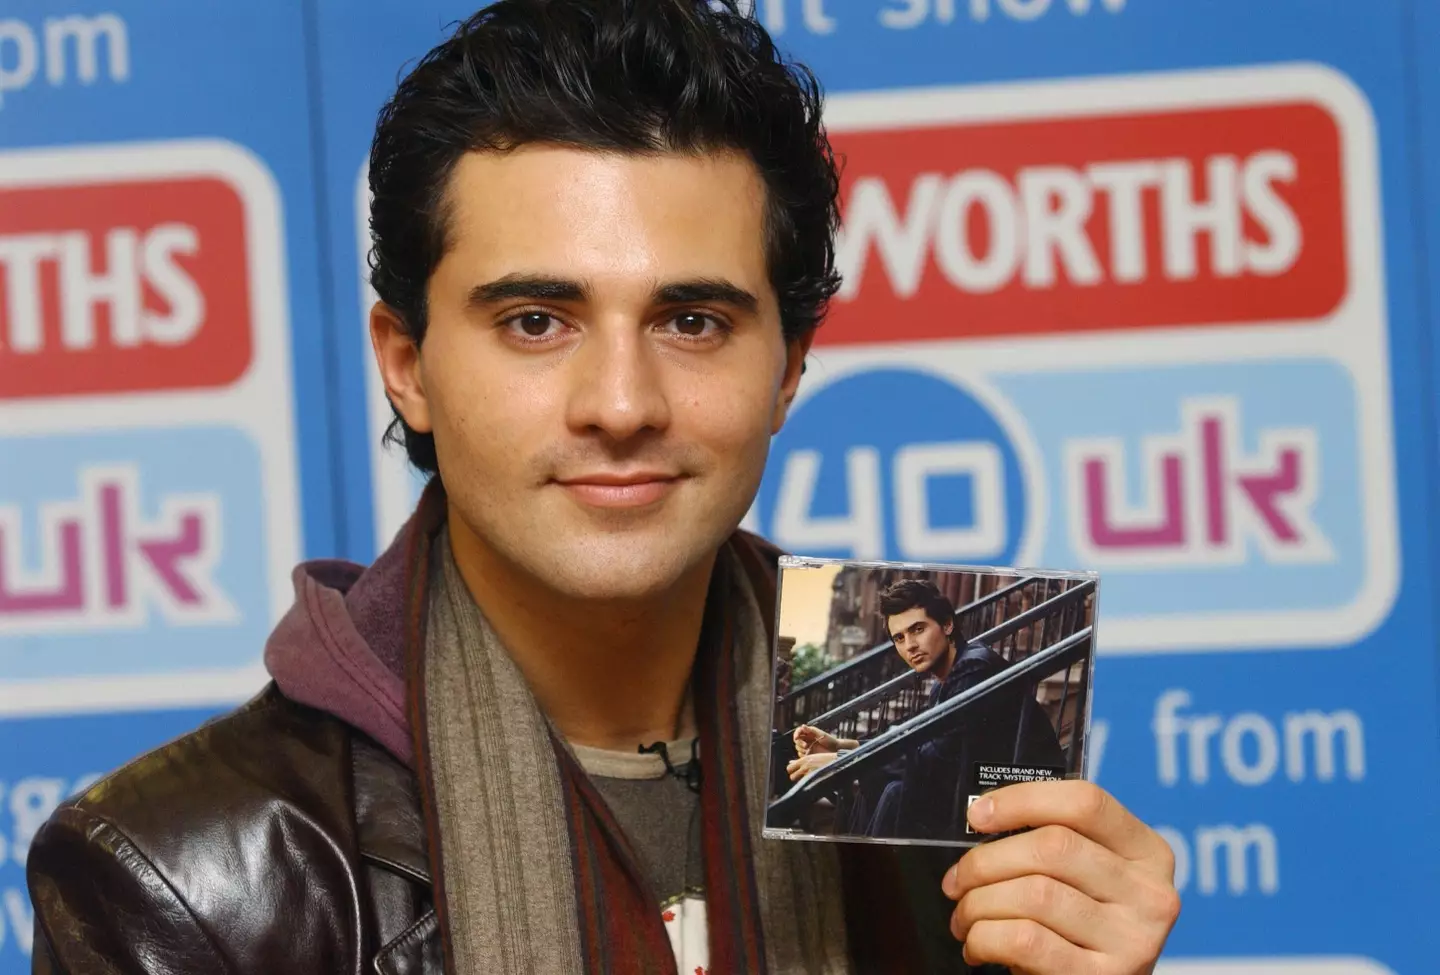 After appearing on Pop Idol, Darius had a successful career as a performer.